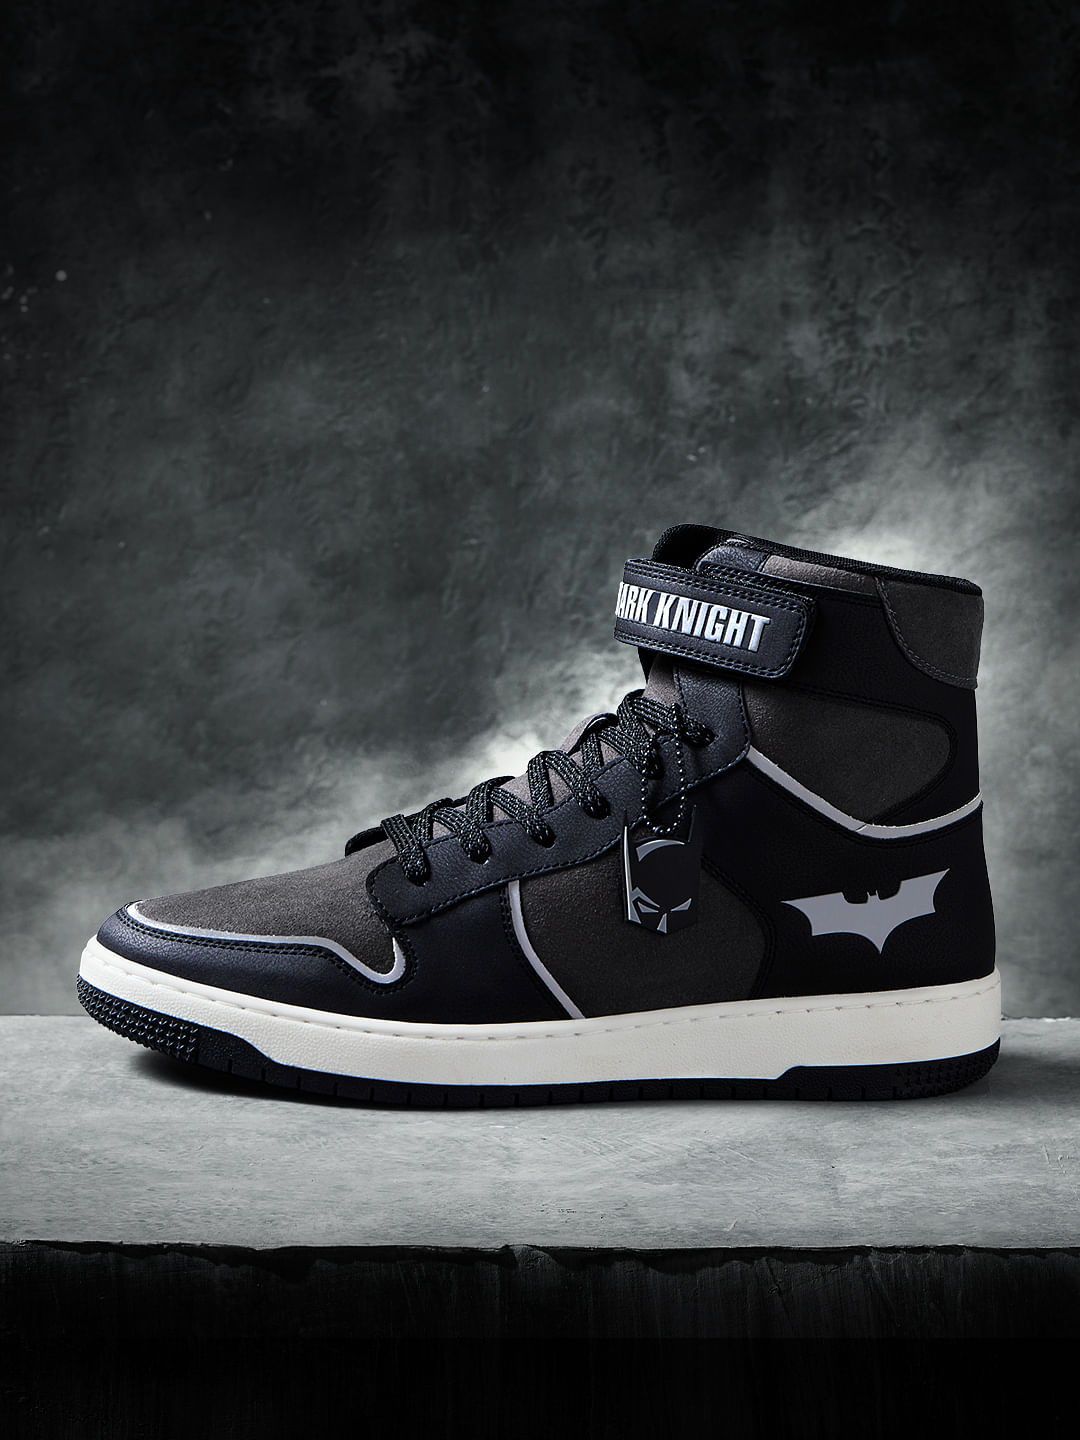 Batman: The Dark Knight Men High Top Sneakers at The Souled Store